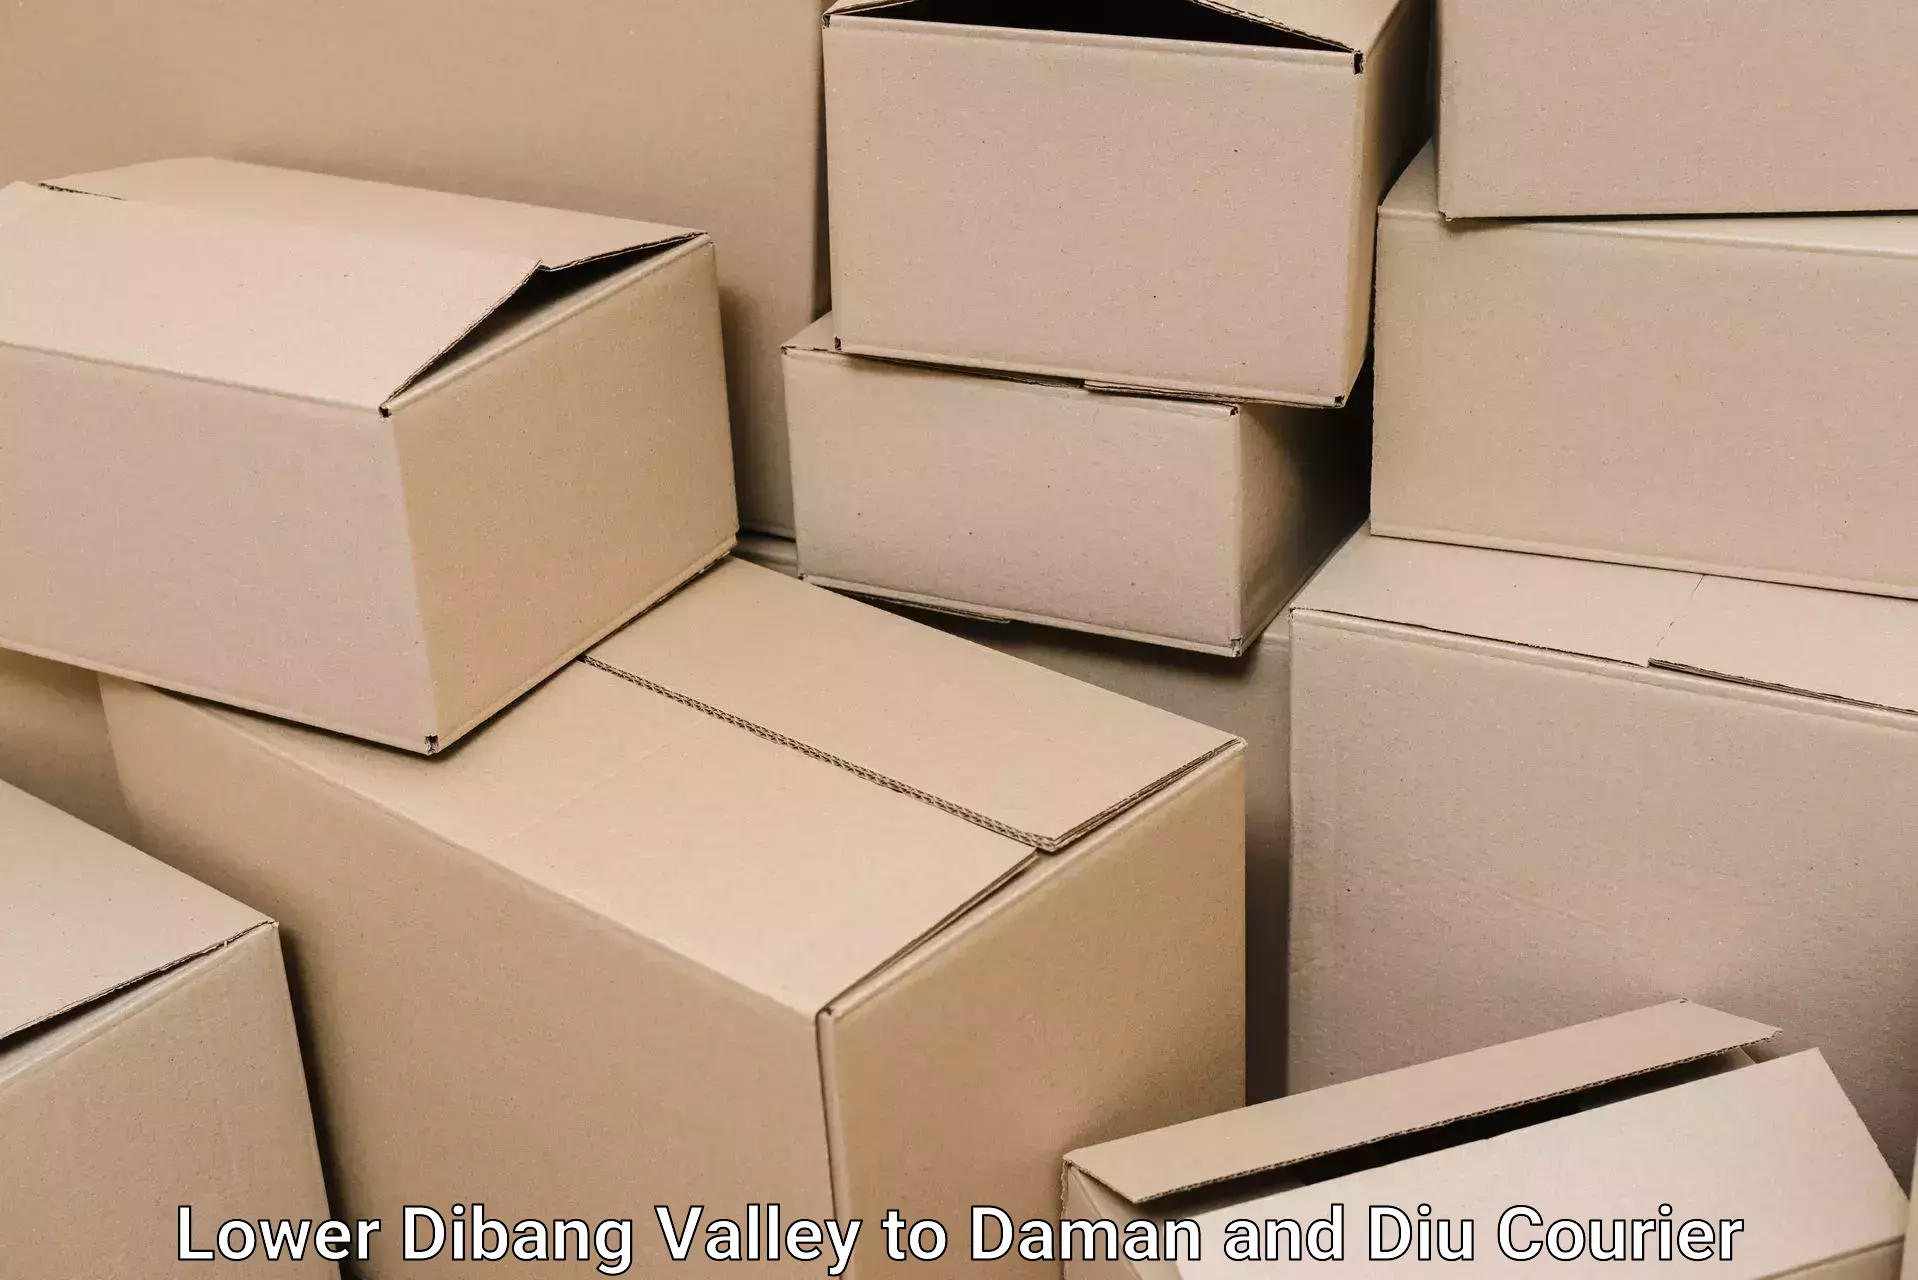 Specialized moving company Lower Dibang Valley to Daman and Diu